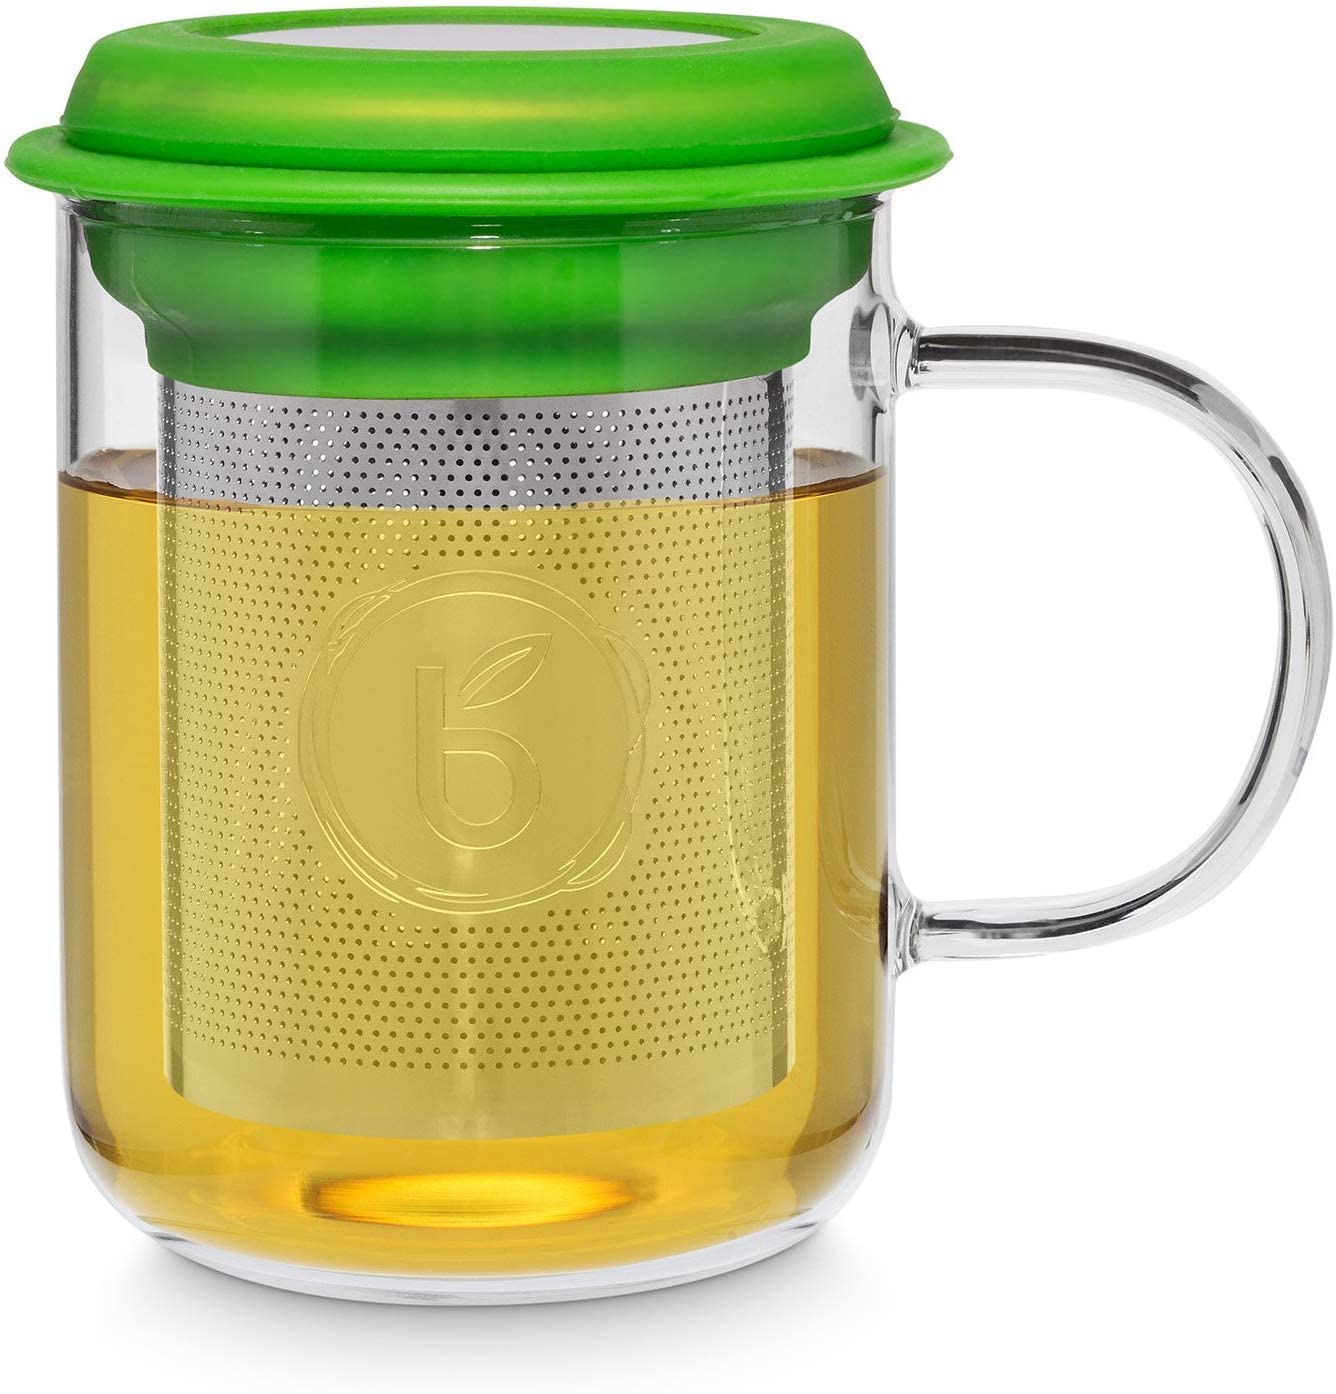 Buntfink \"TeaMug\" tea glass with stainless steel strainer and lid, the tea cup is made of heat-resistant borosilicate glass, the filter can be removed from the cup (tea) 400 ml, green.